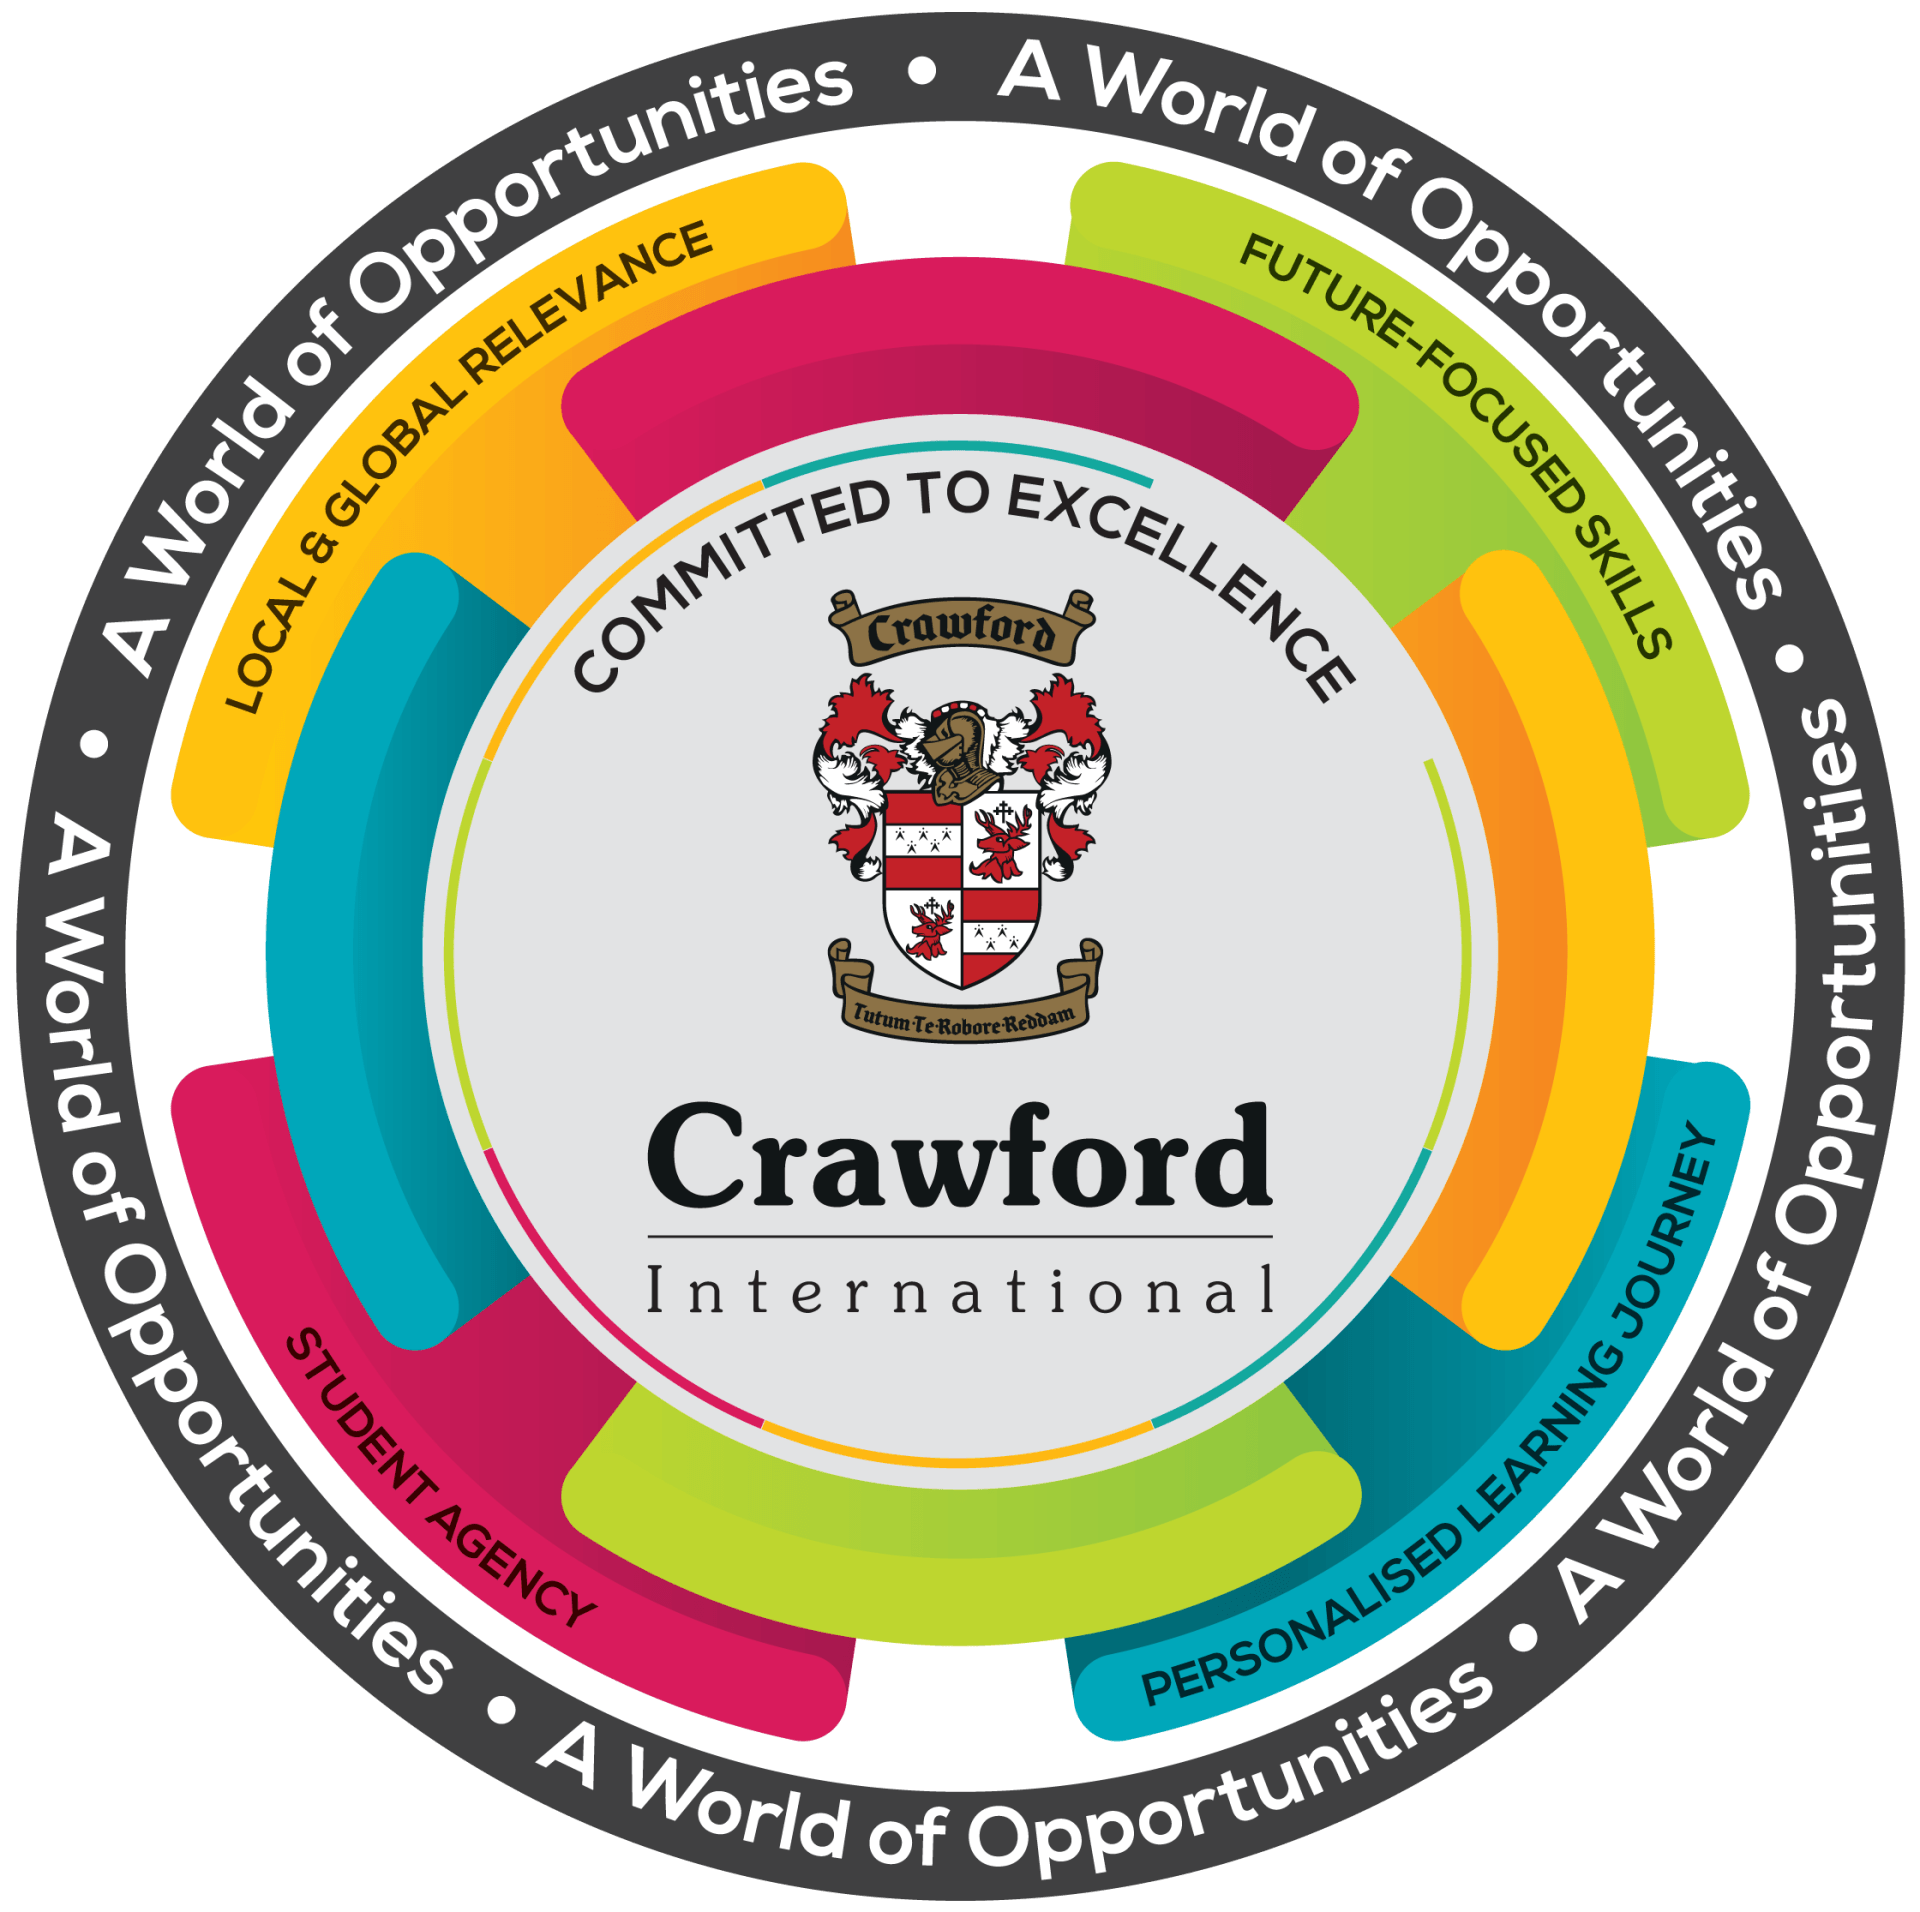 a image for crawford international shows a world of opportunities